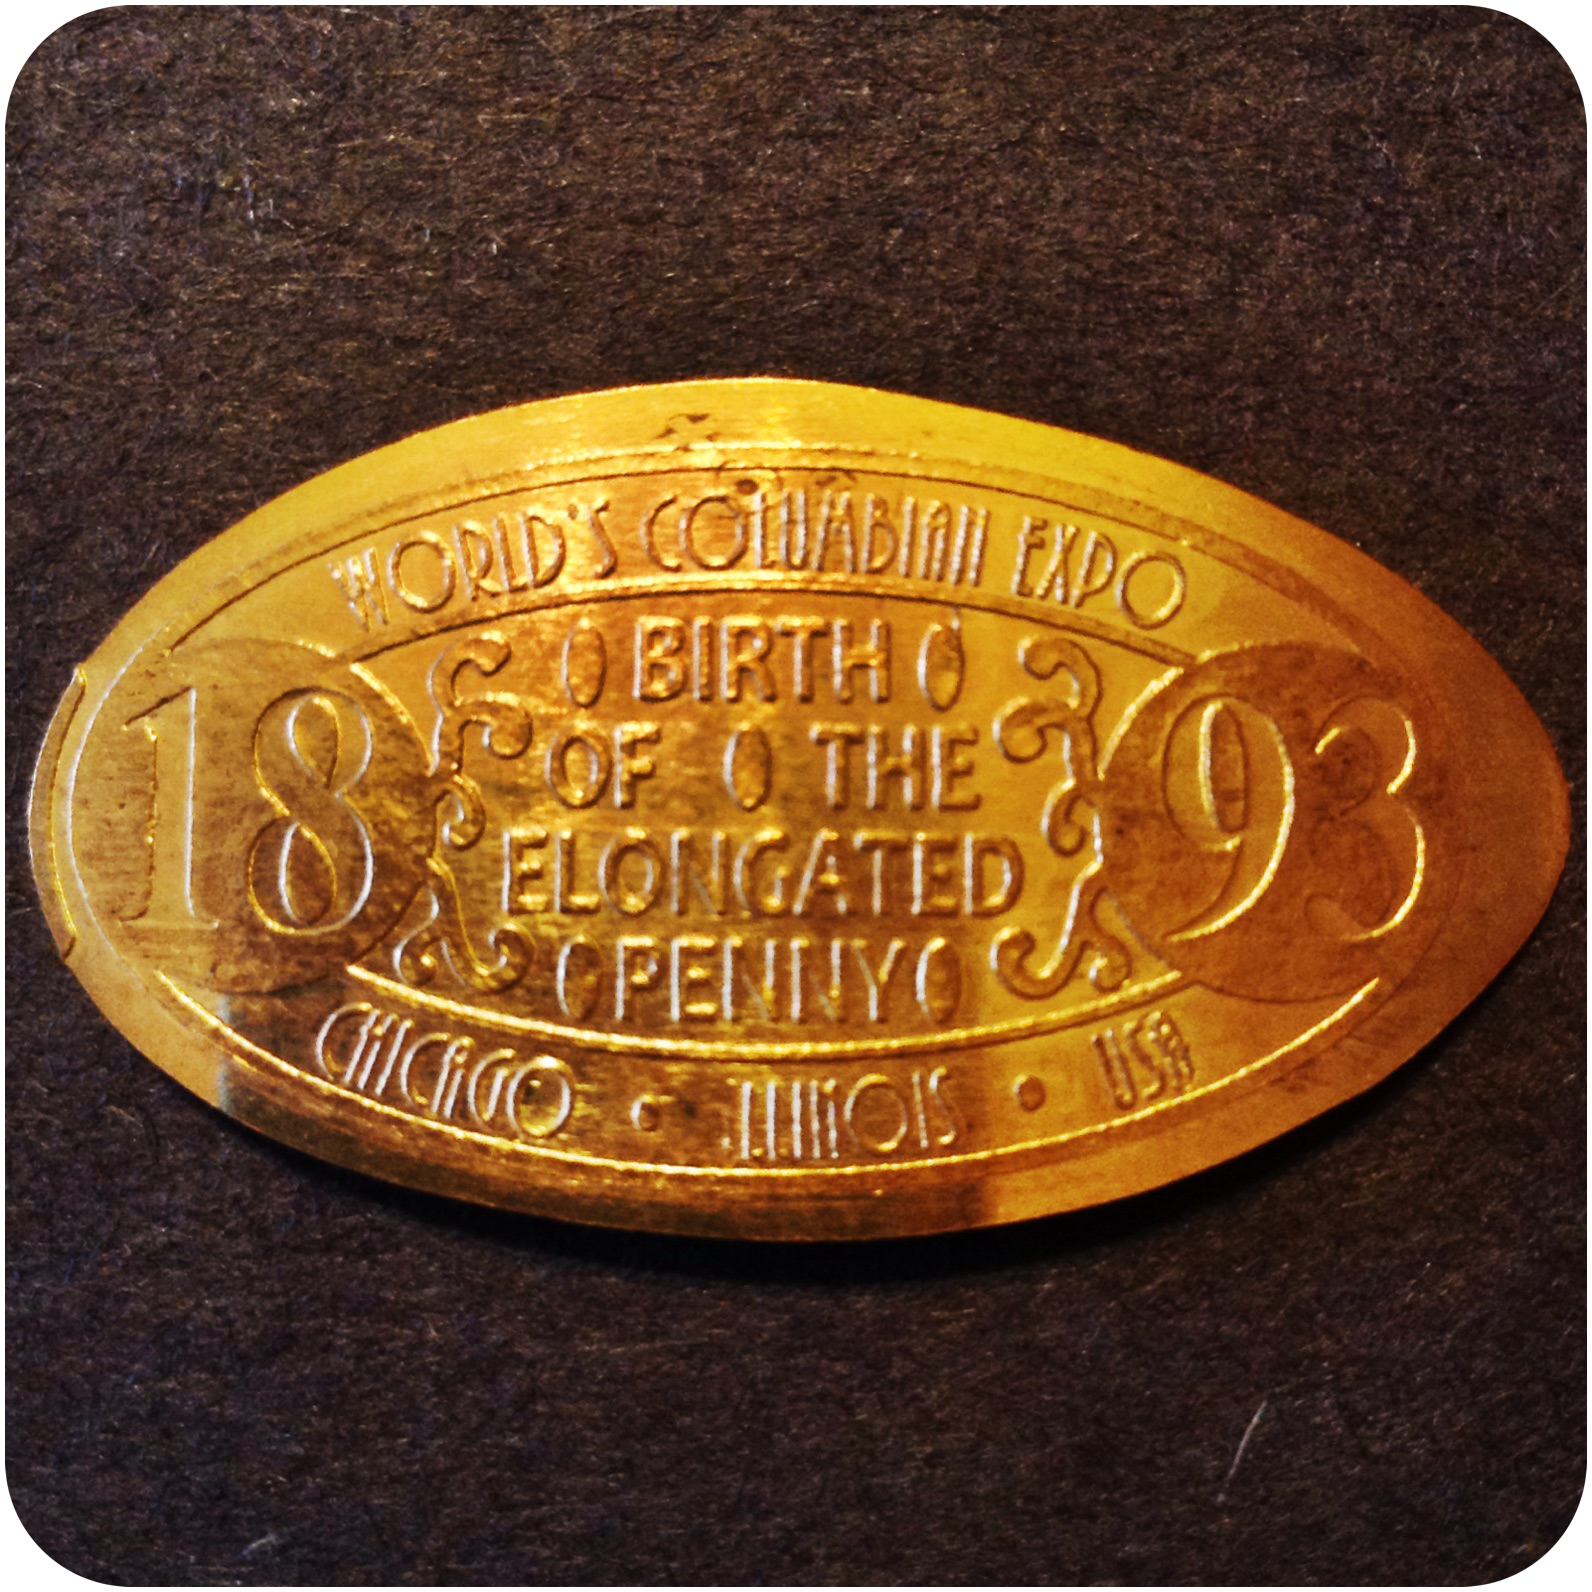 1893, Birth of the Elongated Penny, World's Columbian Expo, Chicago Illinois USA